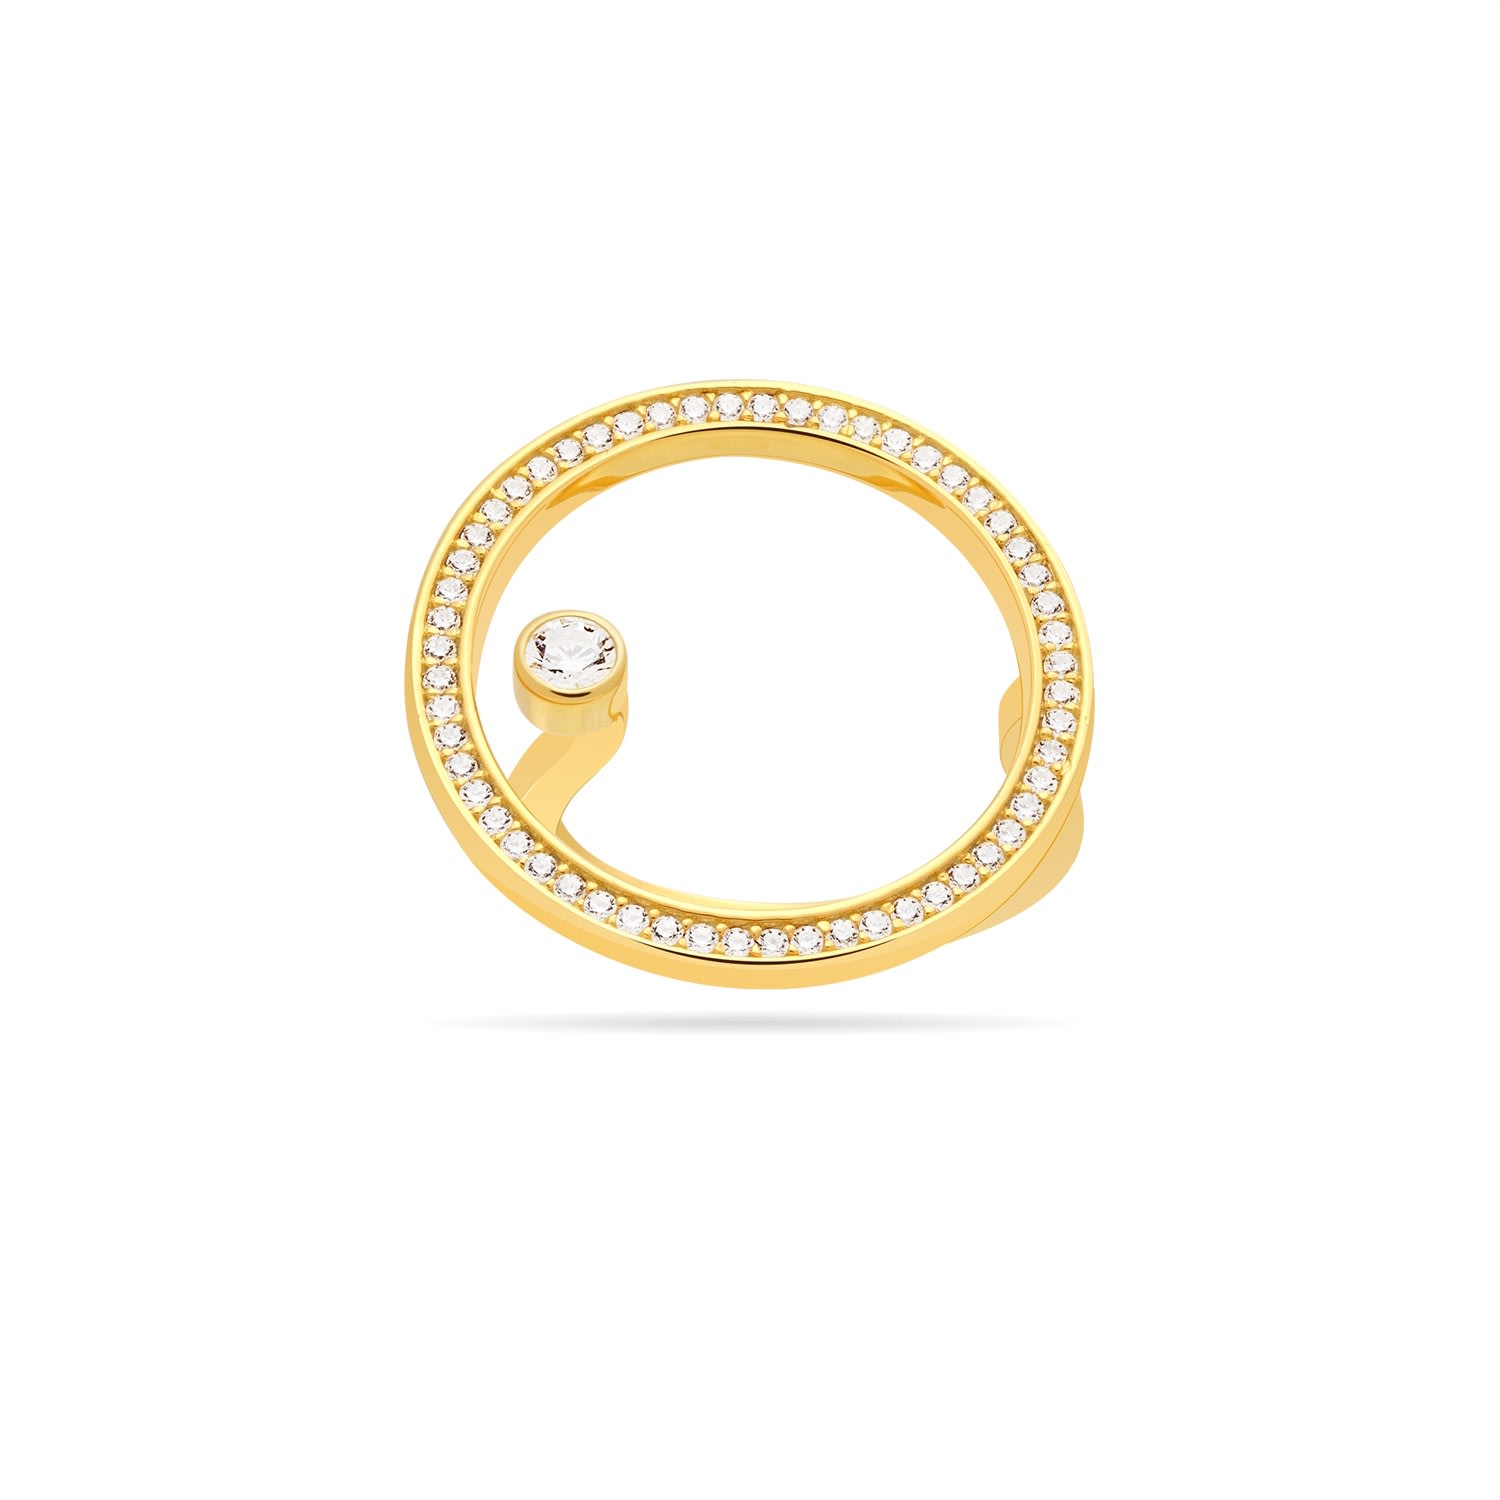 Meulien Women's Large Open Circle Ring With Floating Cz Stud - Gold